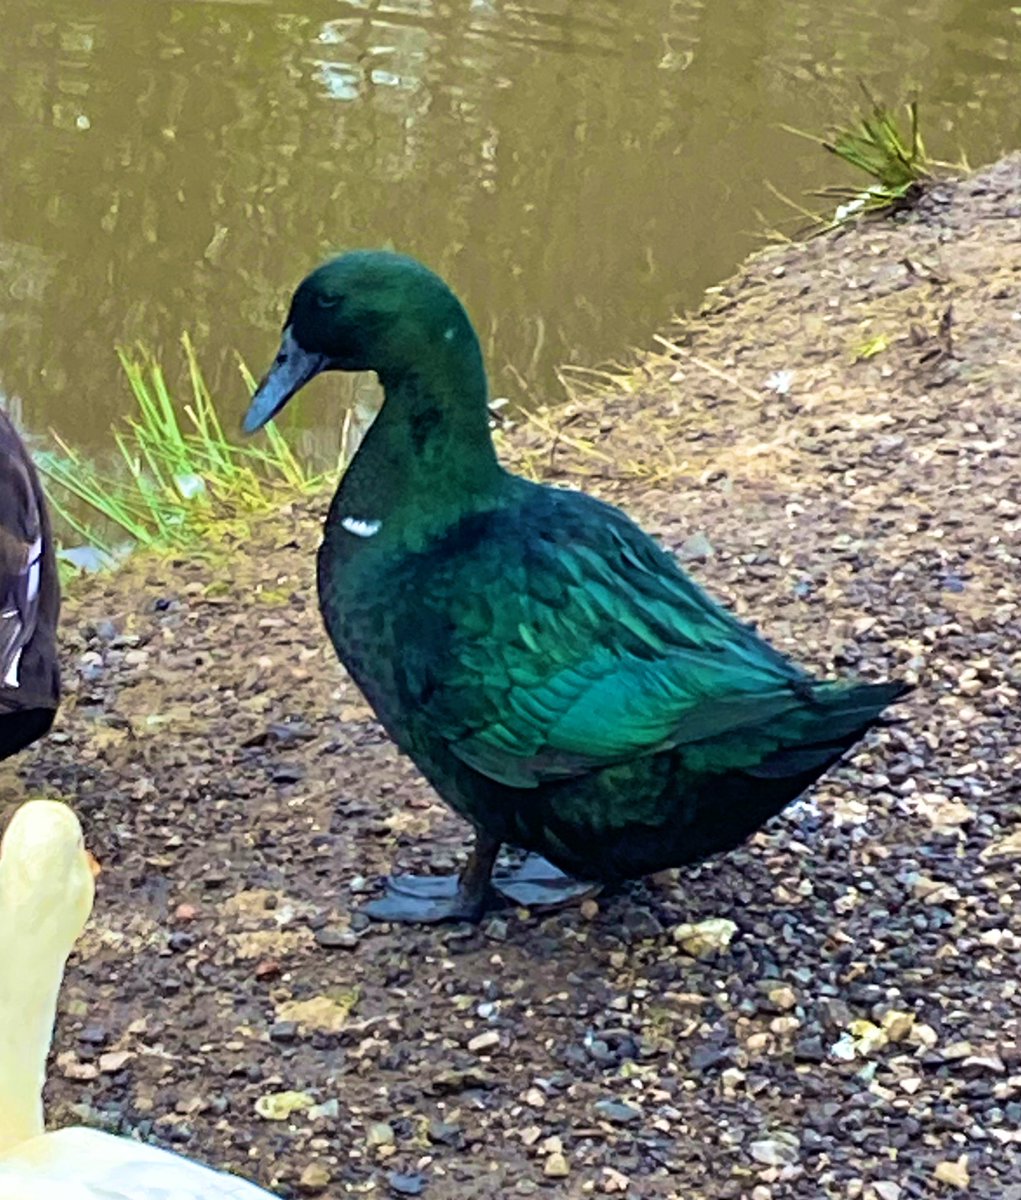 @TheMERL The Greenest Duck in all of West Yorkshire. #InternationalUnsolicitedDuckPicDay